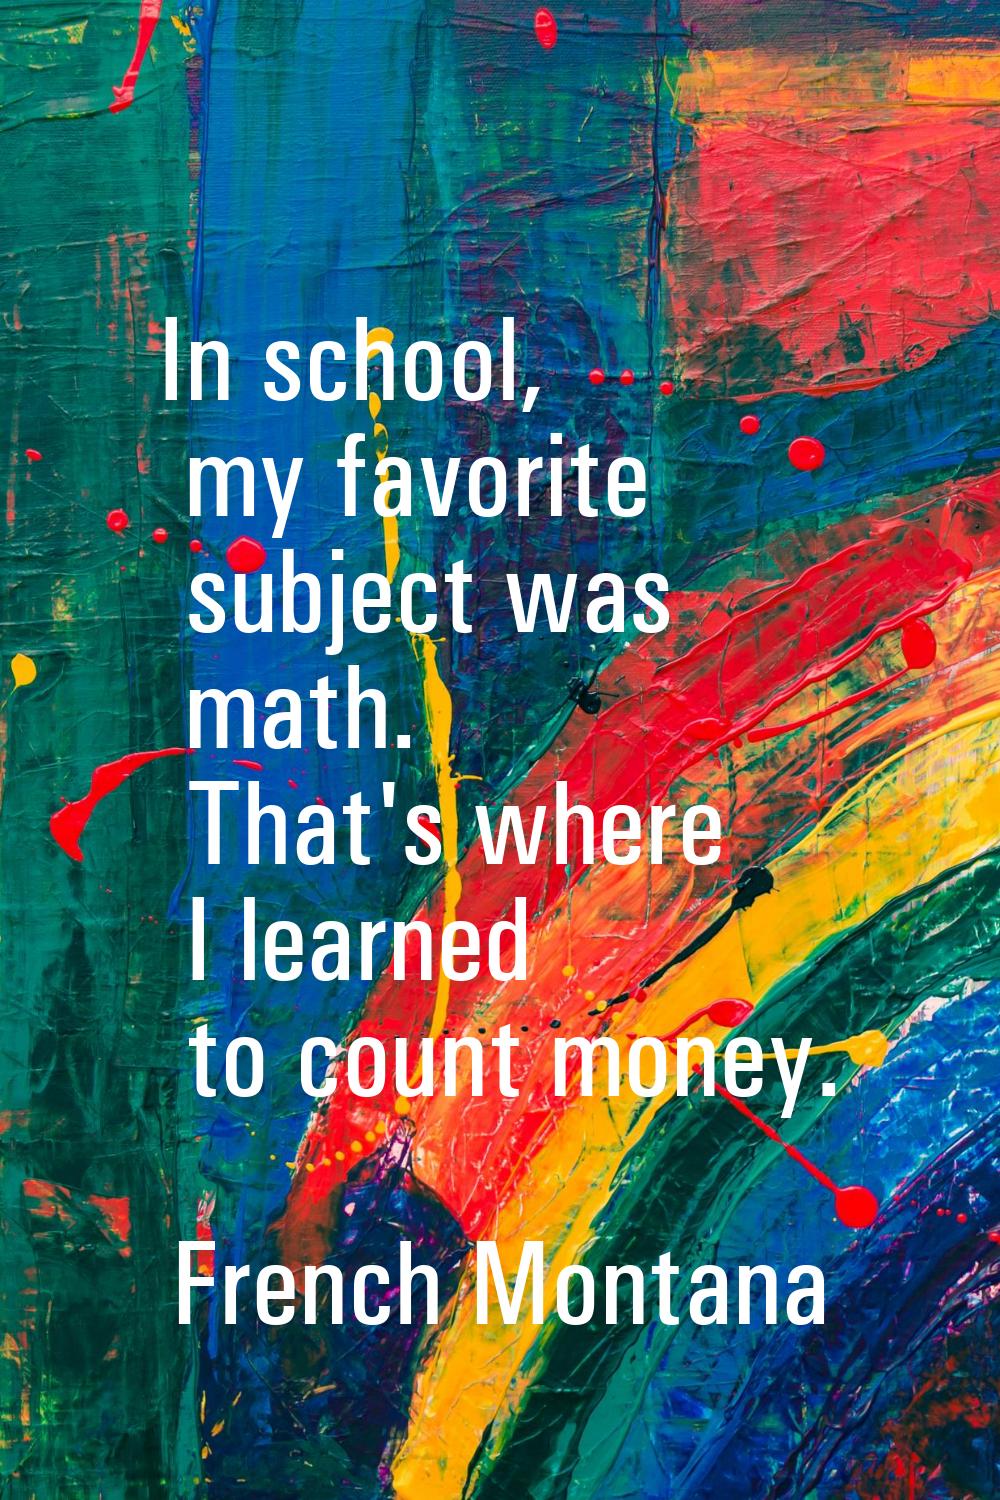 In school, my favorite subject was math. That's where I learned to count money.